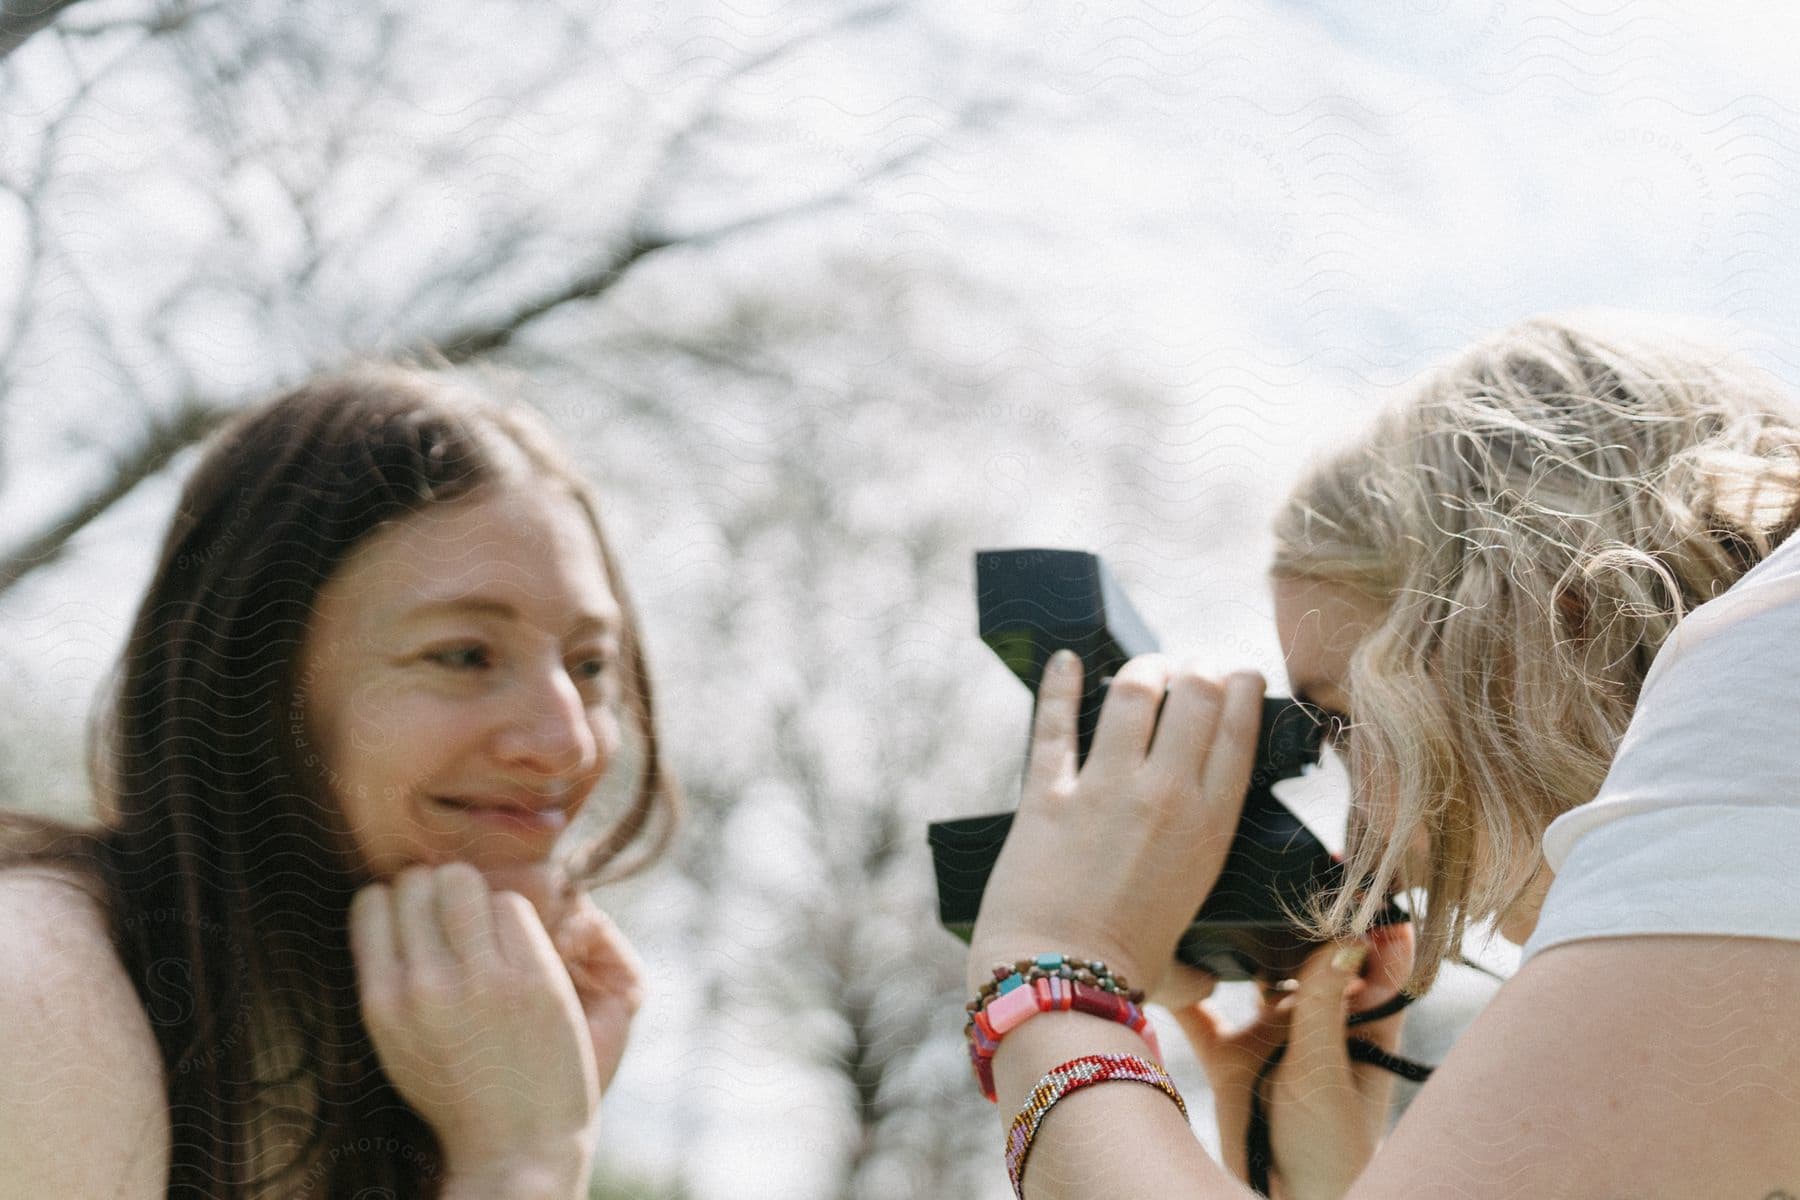 Two teenage girls are outside as one girl holds a camera taking a picture of her friend